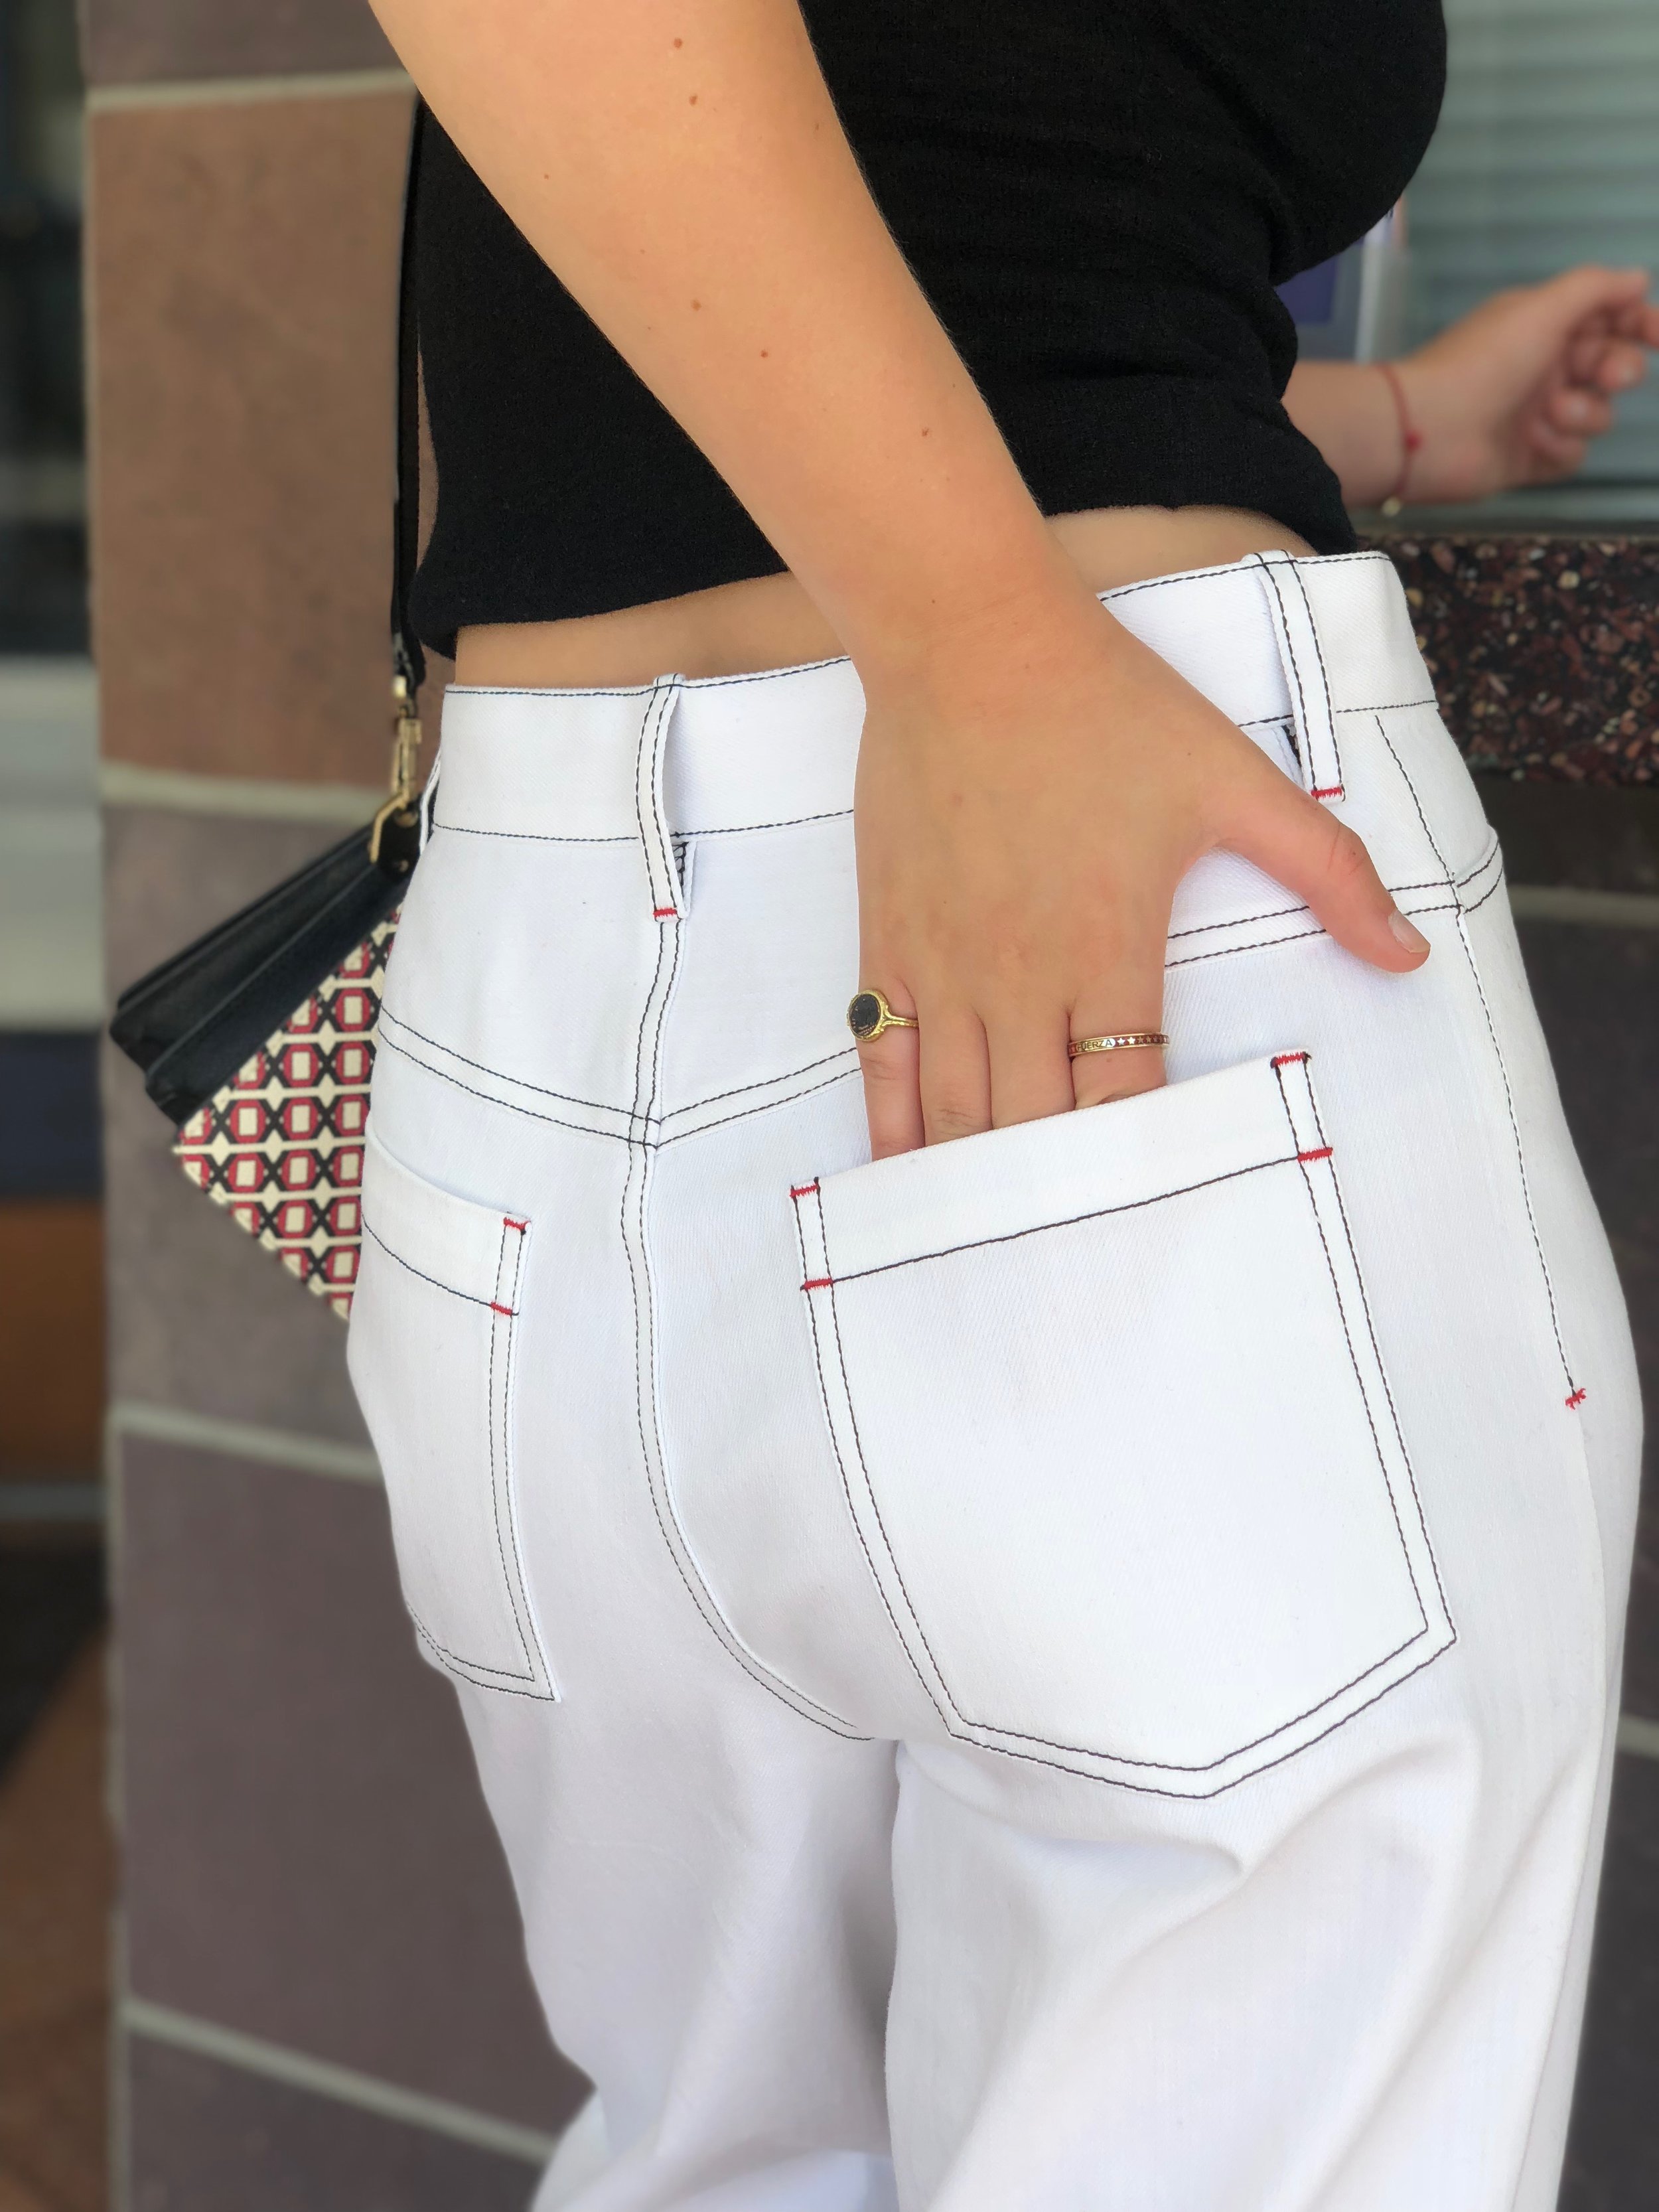 Elizabeth  L O V E S these white jeans - they keep you cool "Instead of looking like you're about to put on a button down and hit up Martha's Vinyard.